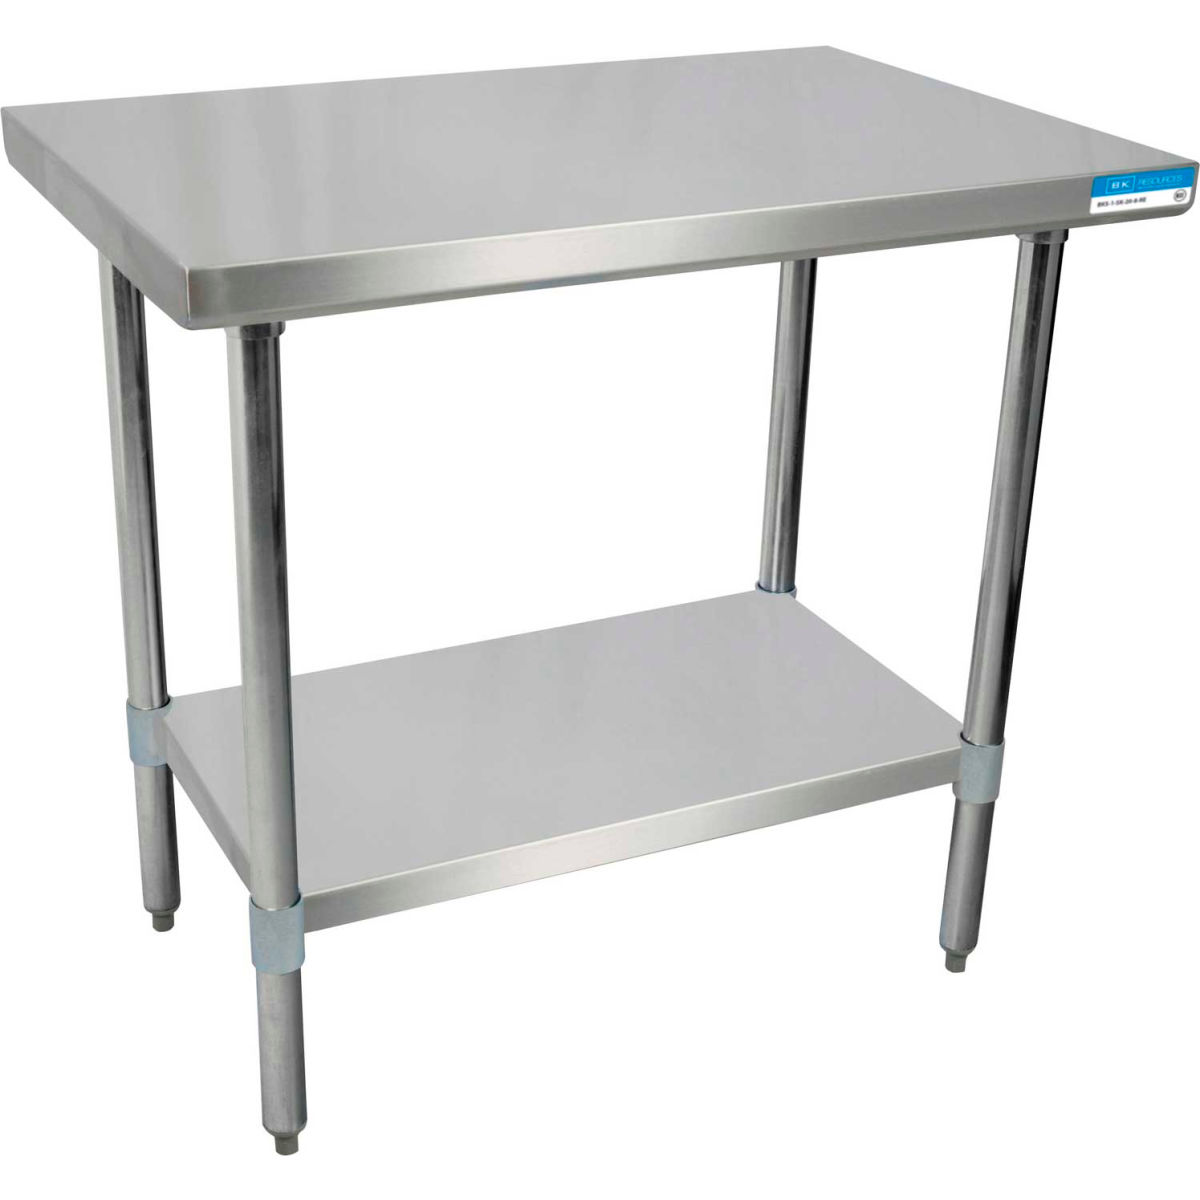 Picture of BK Resources B0899549 18 Gauge 430 Series Stainless Workbench with Adjustable Undershelf - 30 x 24 in.